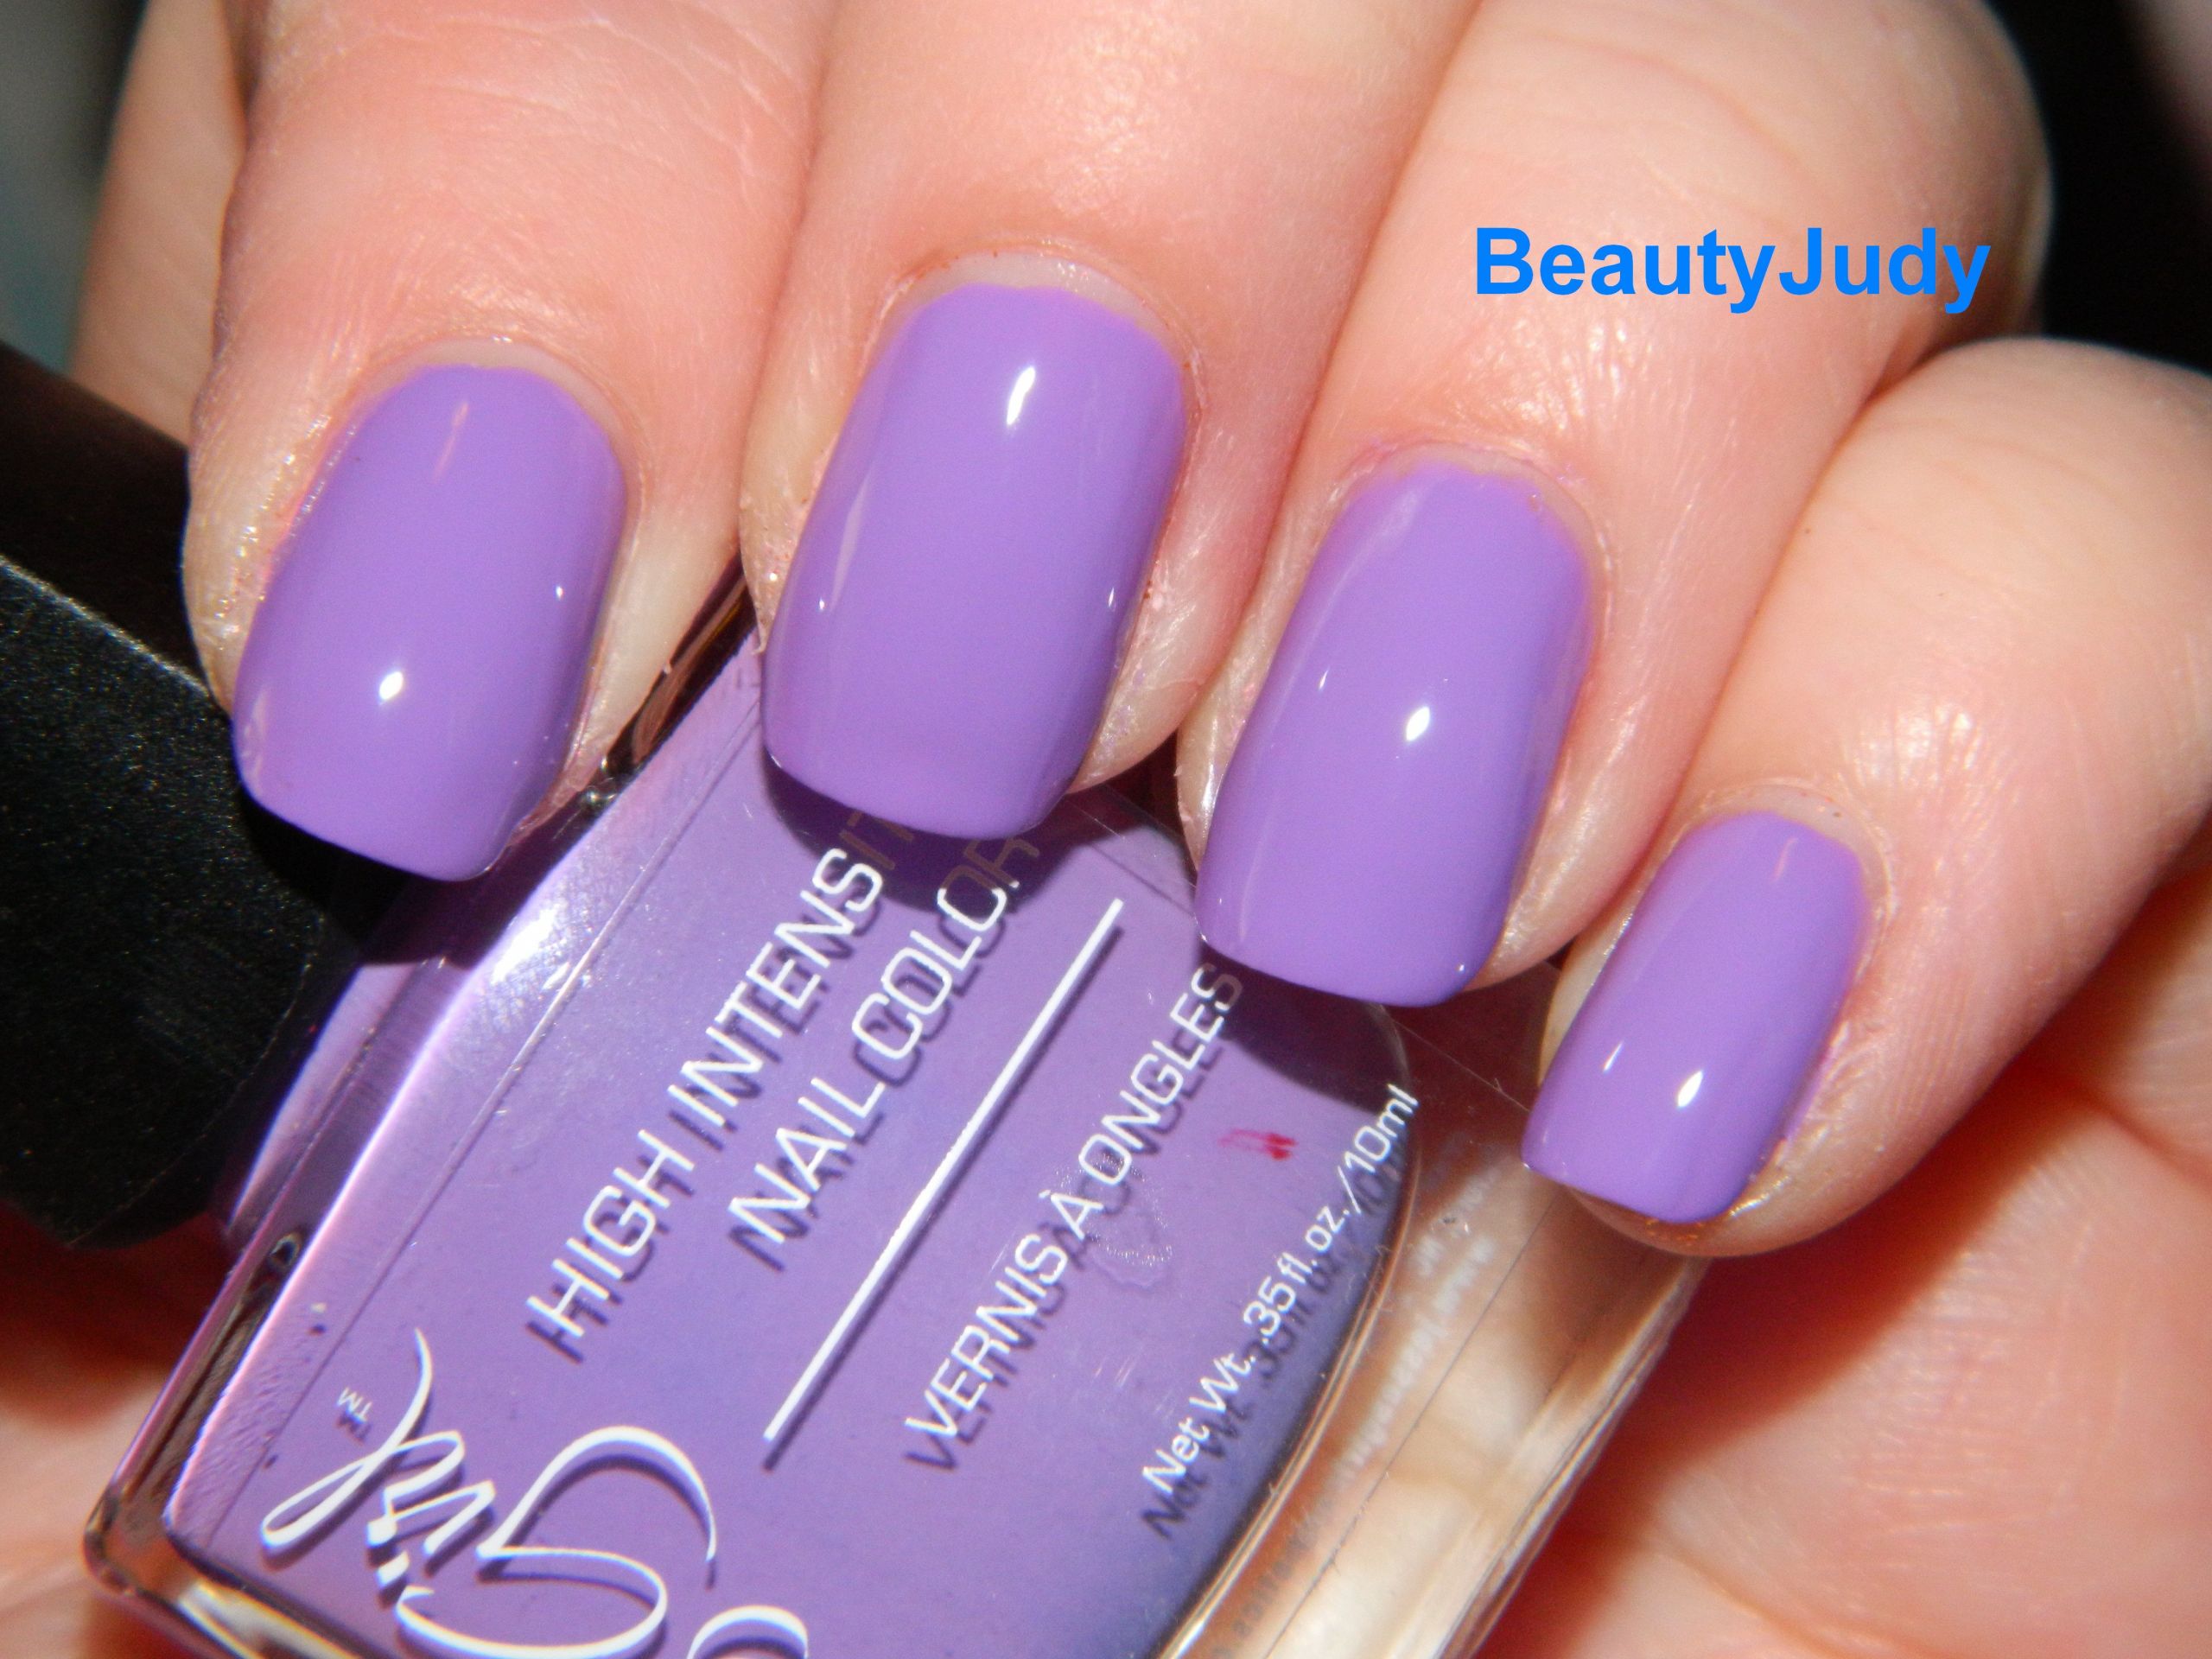 2. "Top Spring Break Nail Colors to Brighten Up Your Vacation" - wide 3